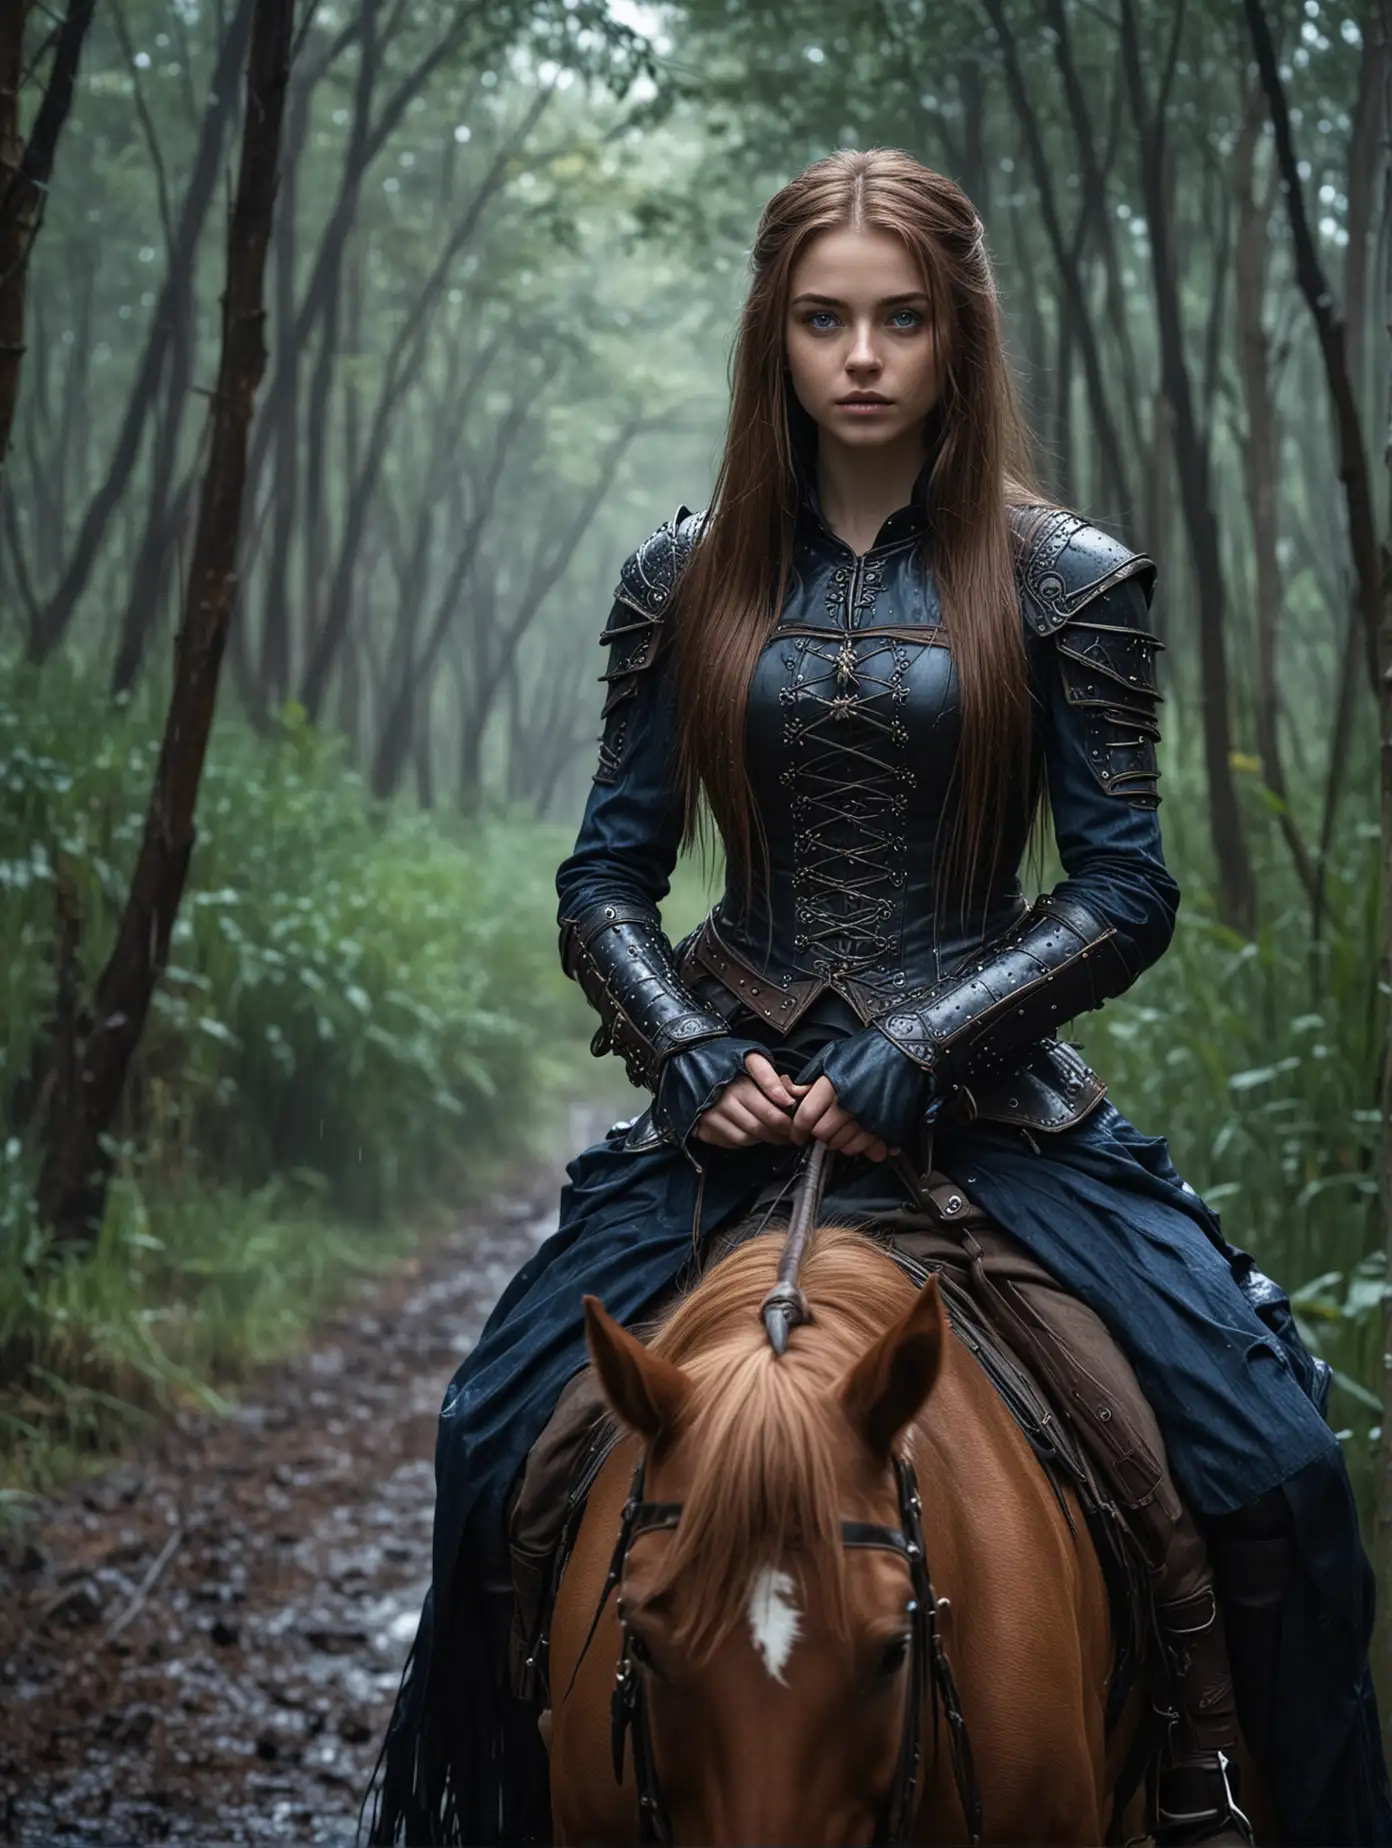 Character: Young 18 years old woman, blue eyes, brown straight long hair, gothic outfit with armor in dark blue color. Scenery: Rushes on horseback through a dense forest in rainy day.